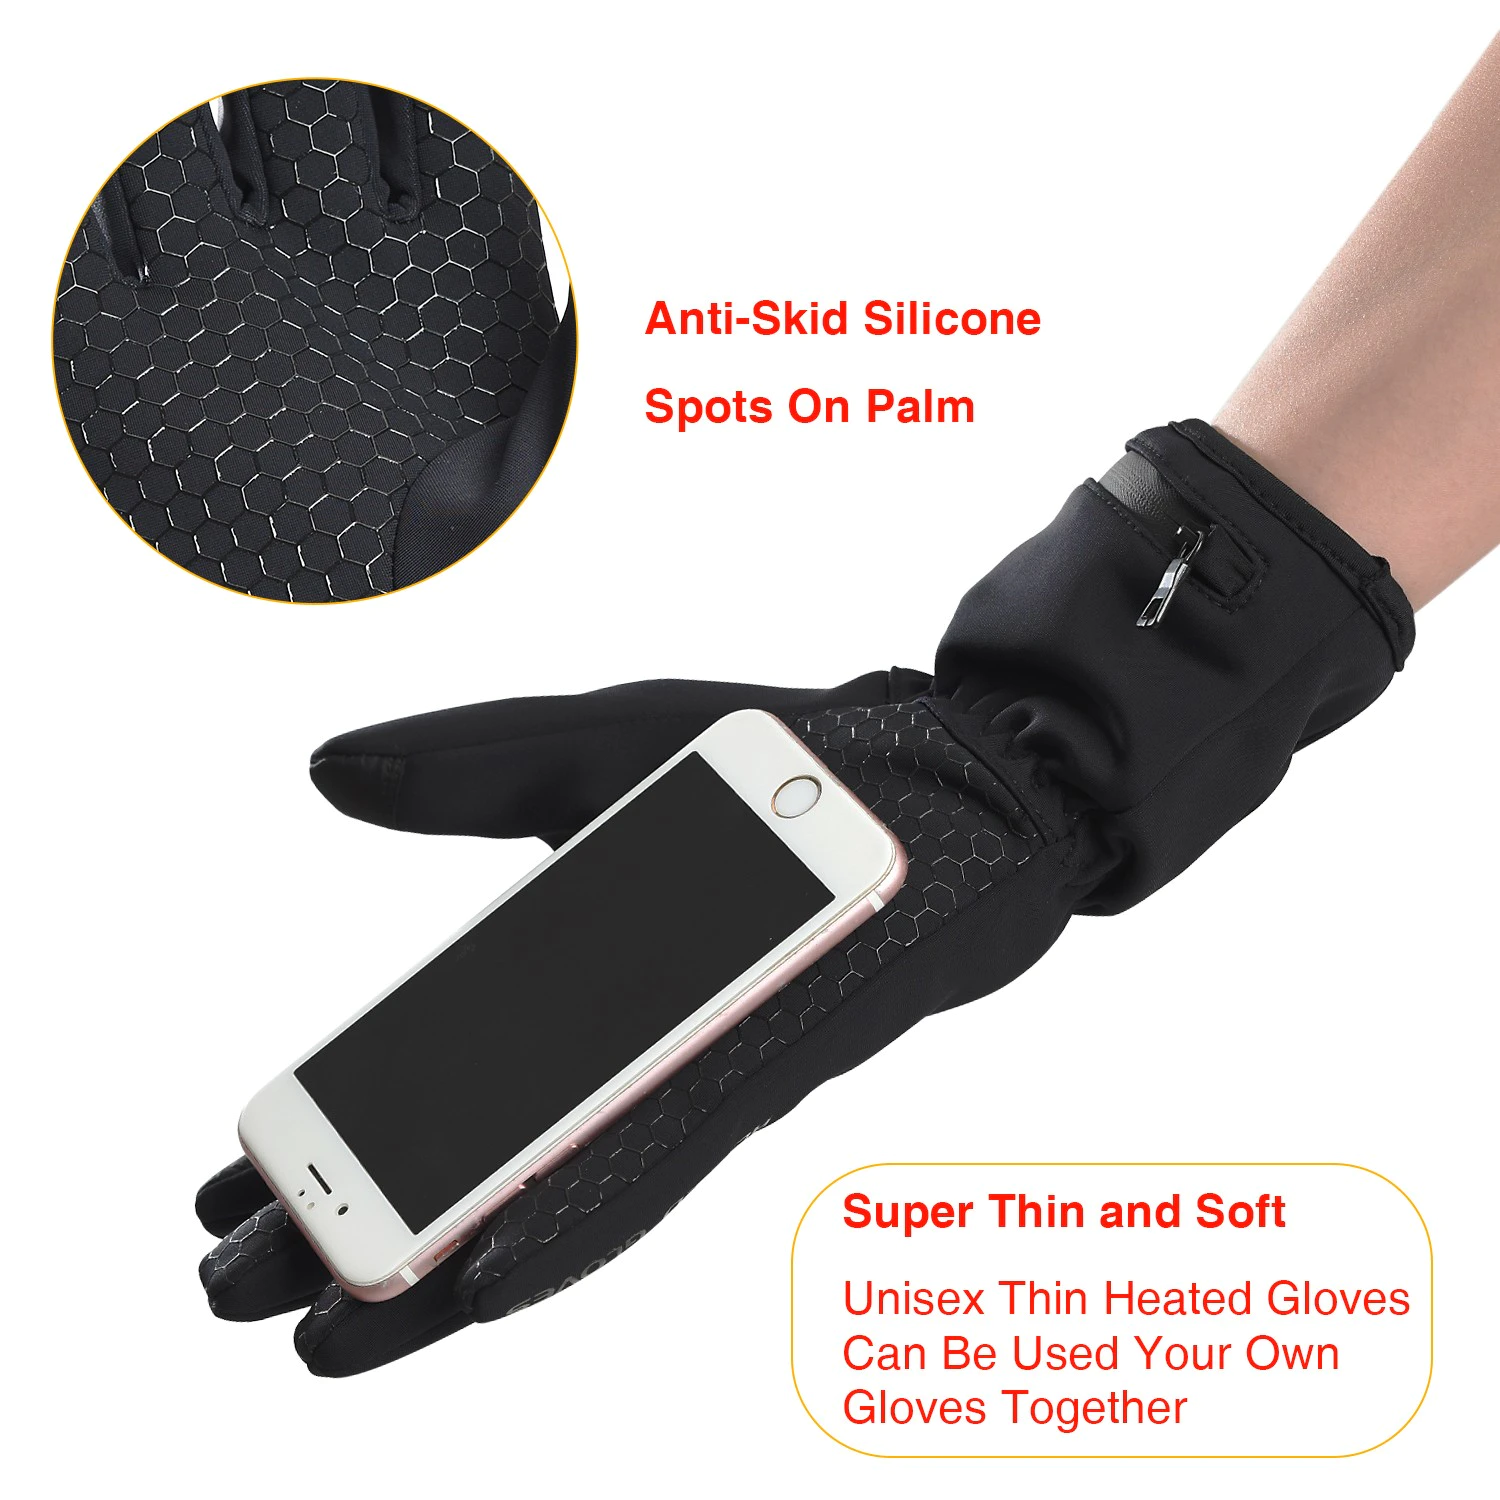 Dr. Warm sensitive heated winter gloves improves blood circulation for winter